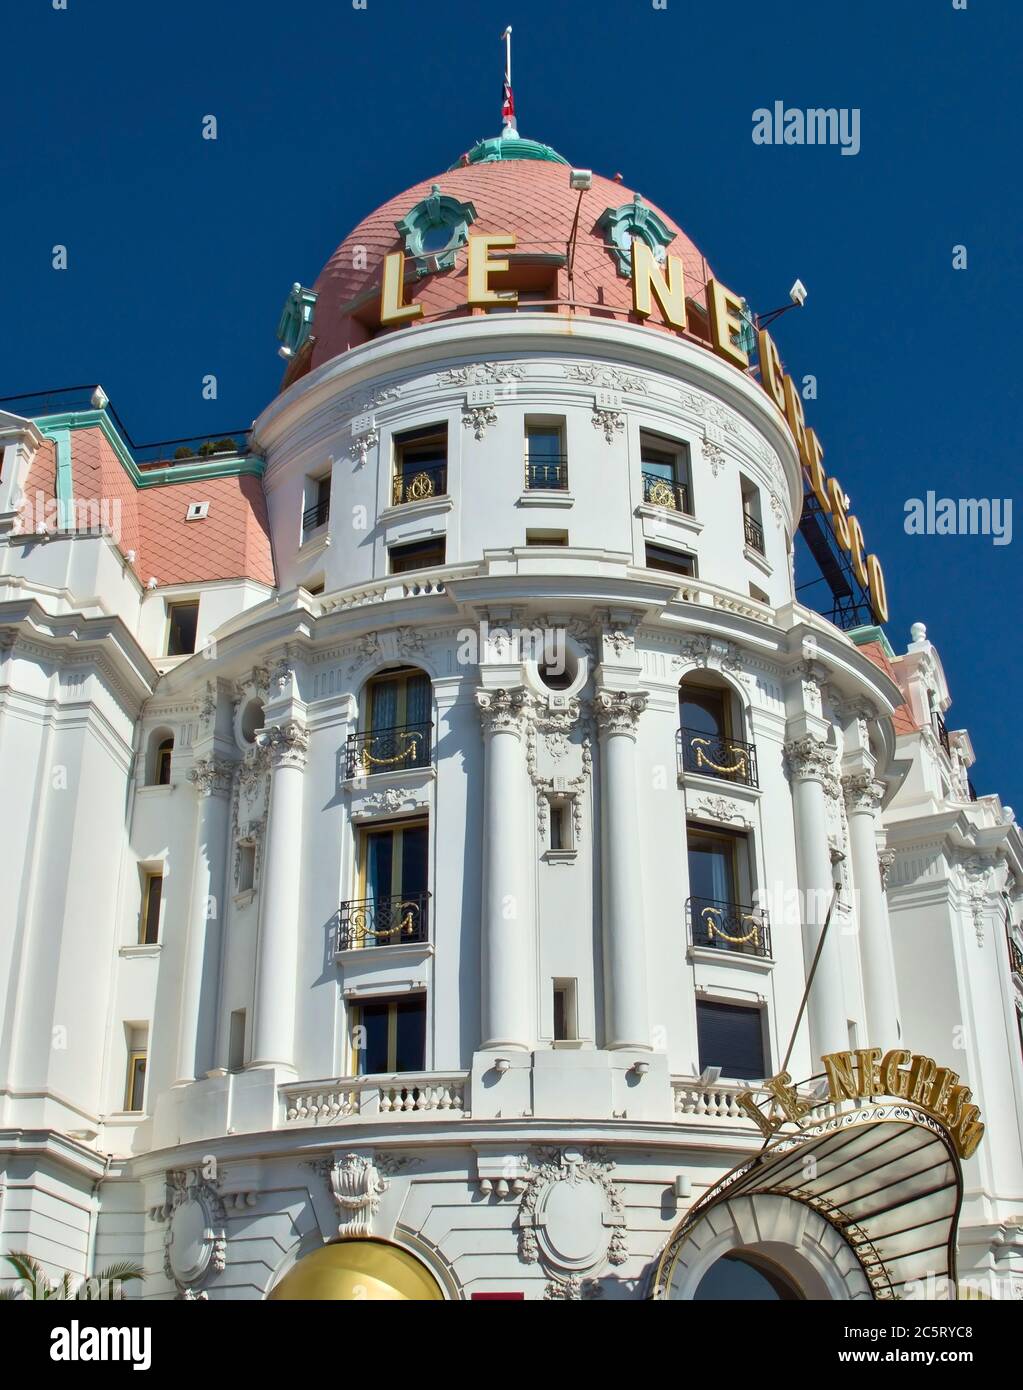 NICE, FRANCE - MAY 4: Luxury Hotel Negresco on May 4, 2013 in Nice, France. Hotel Negresco is the famous luxury hotel on the Promenade des Anglais in Stock Photo